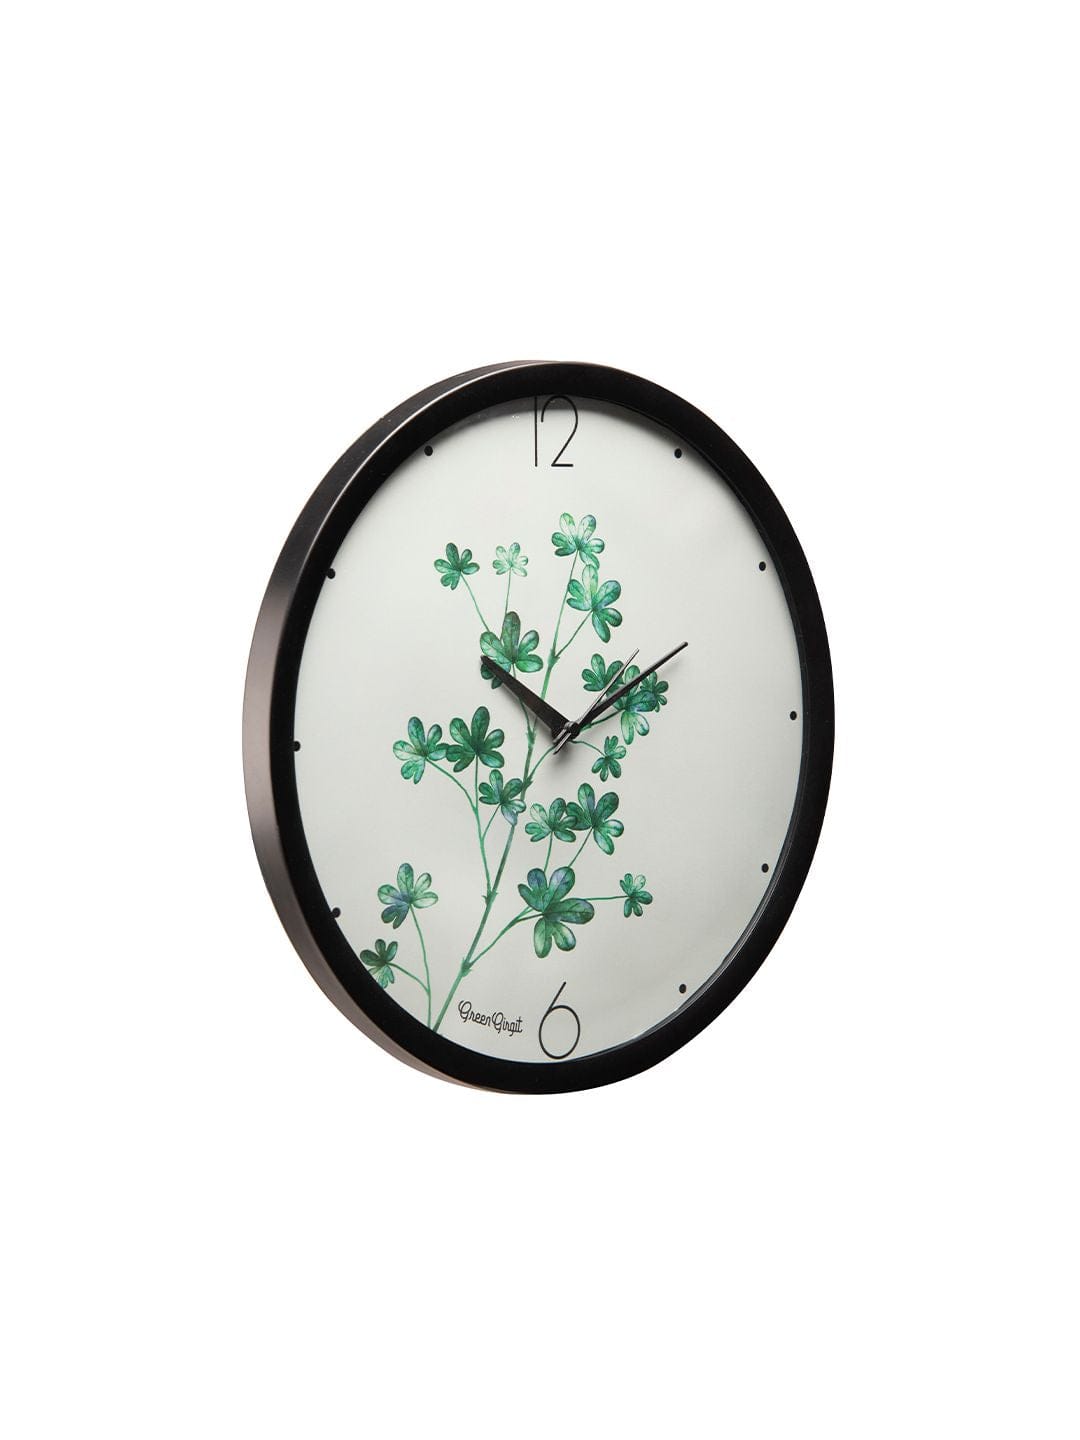 Green leaves Multicolor Wall Clock